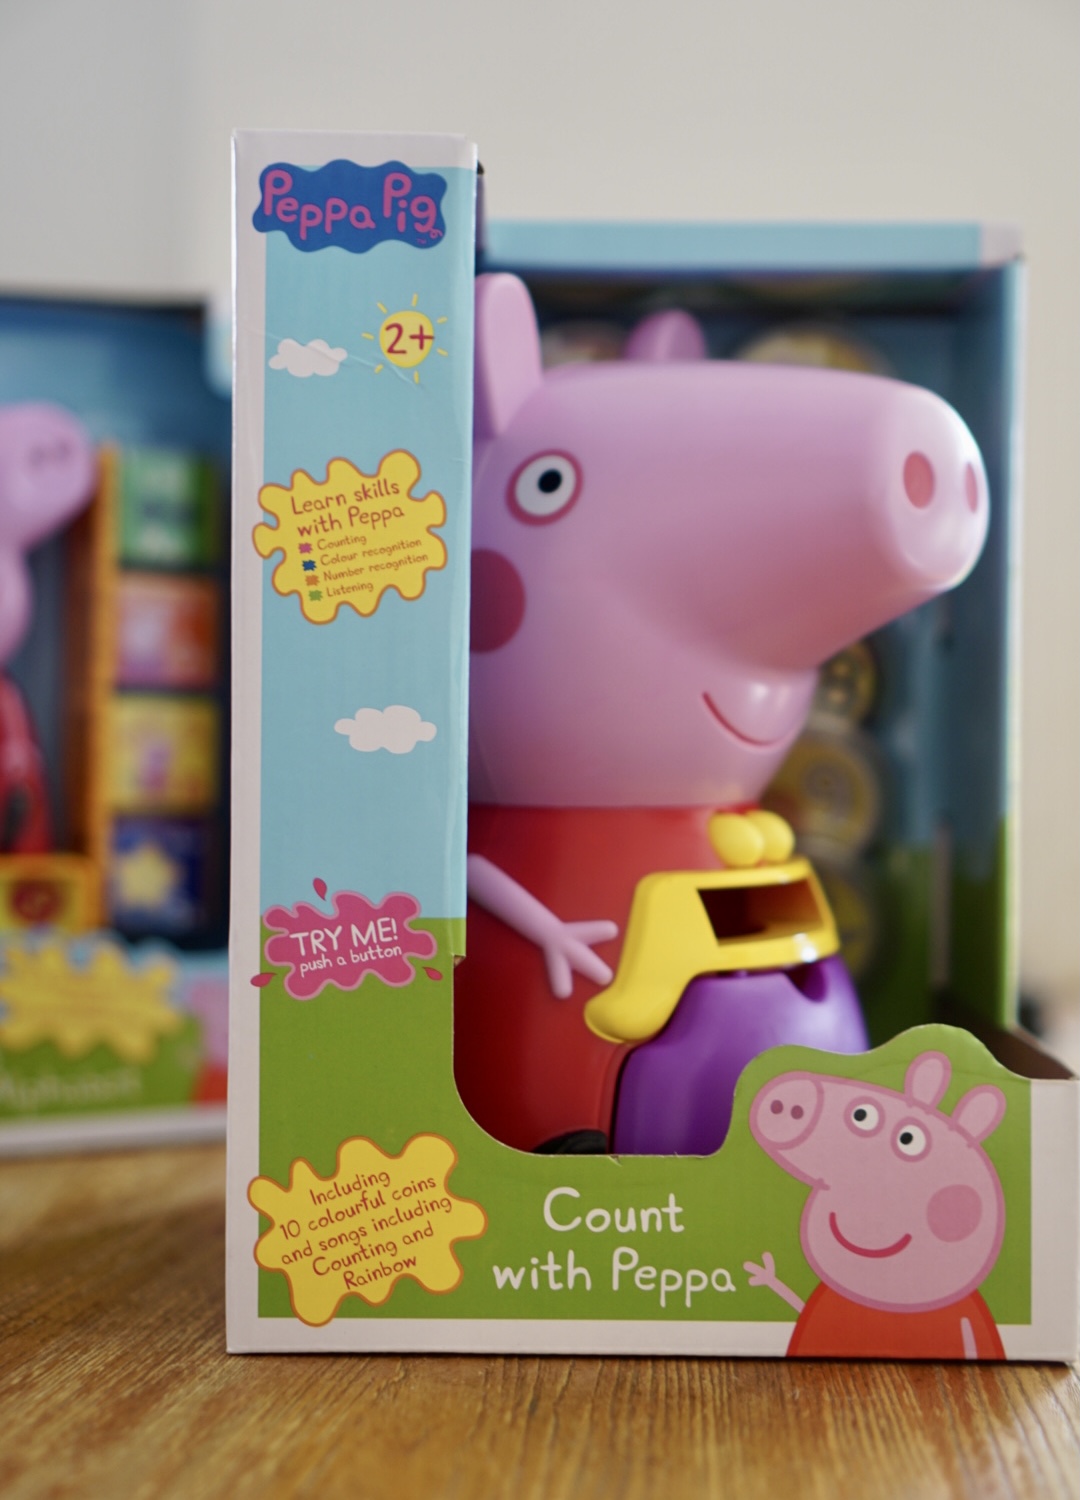 Count with Peppa